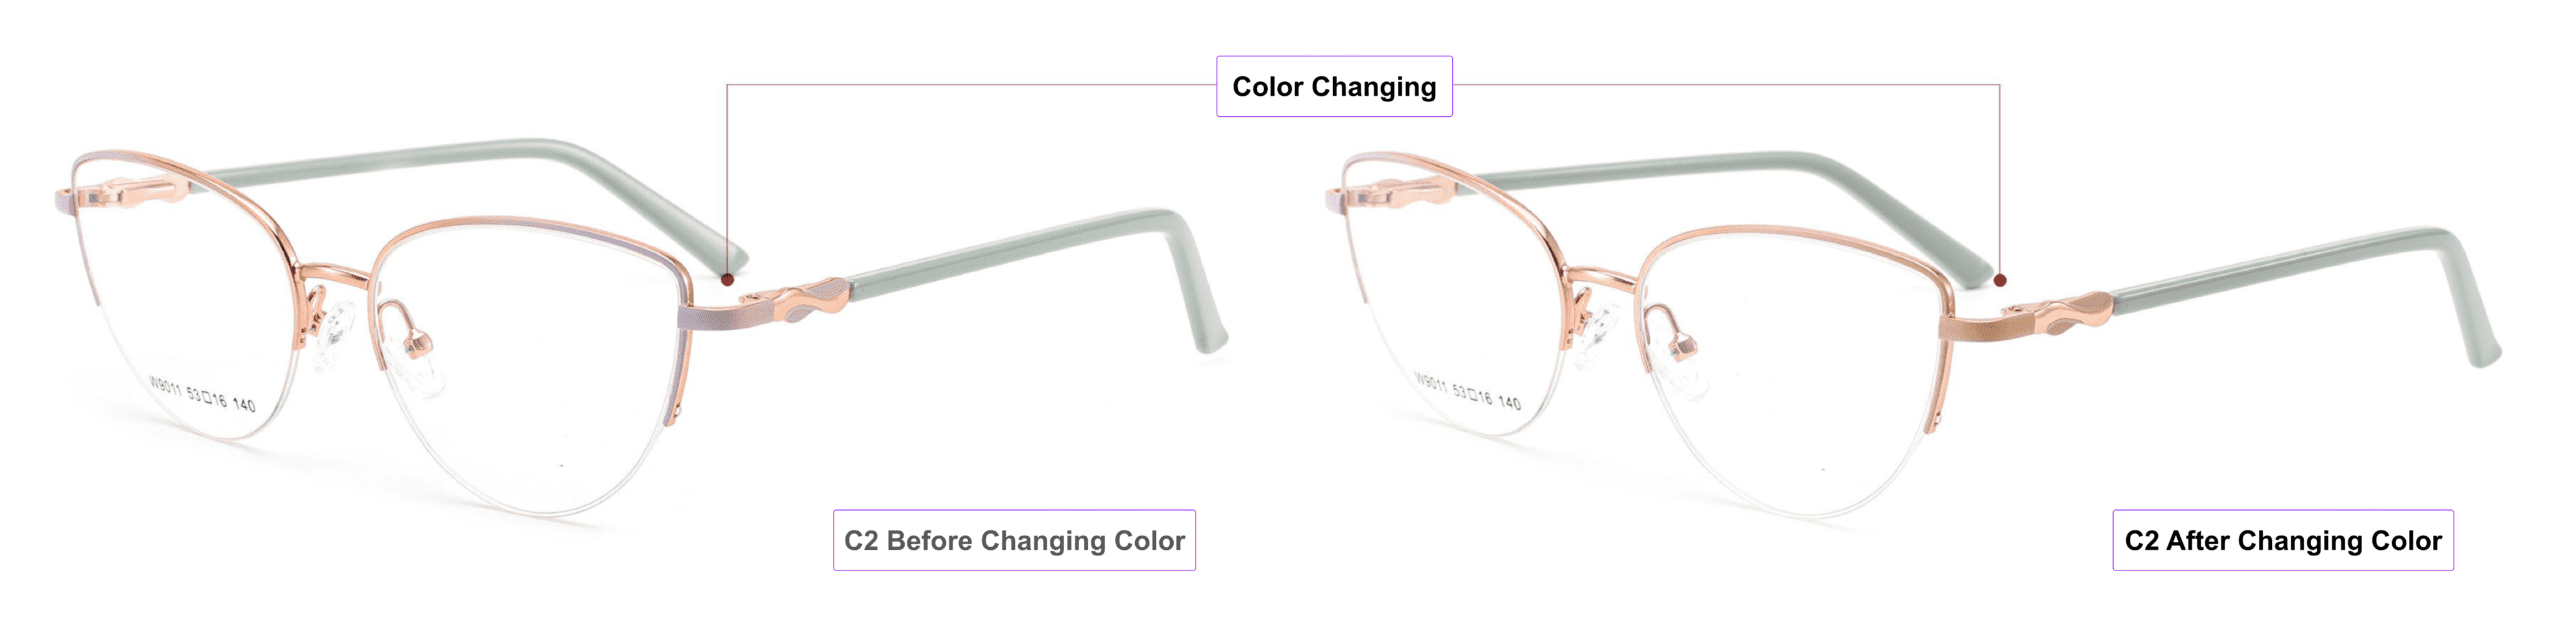 color changing glasses frames, China glasses supplier, process of color changing, eye glass accessories, UV-activated, rose gold, mist blue